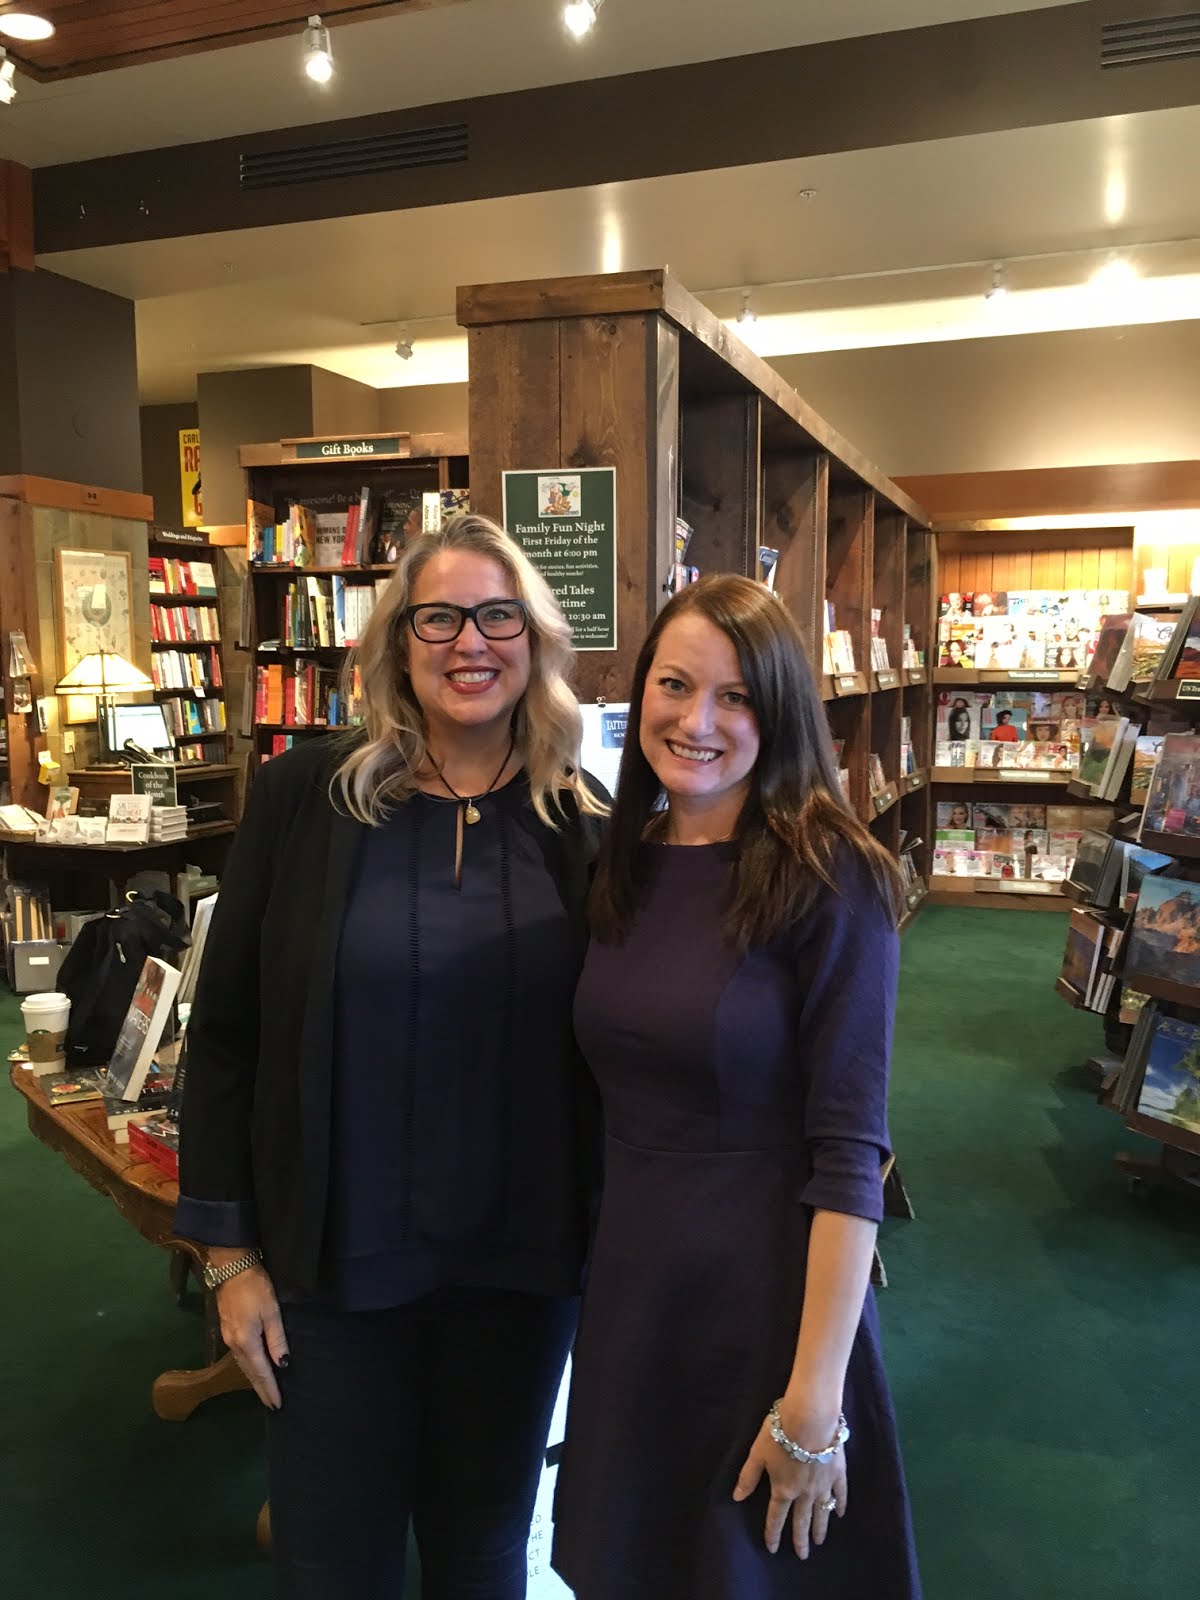 Review contributor Jennifer O with Psychological thriller writer at the Tattered Cover Book Store.